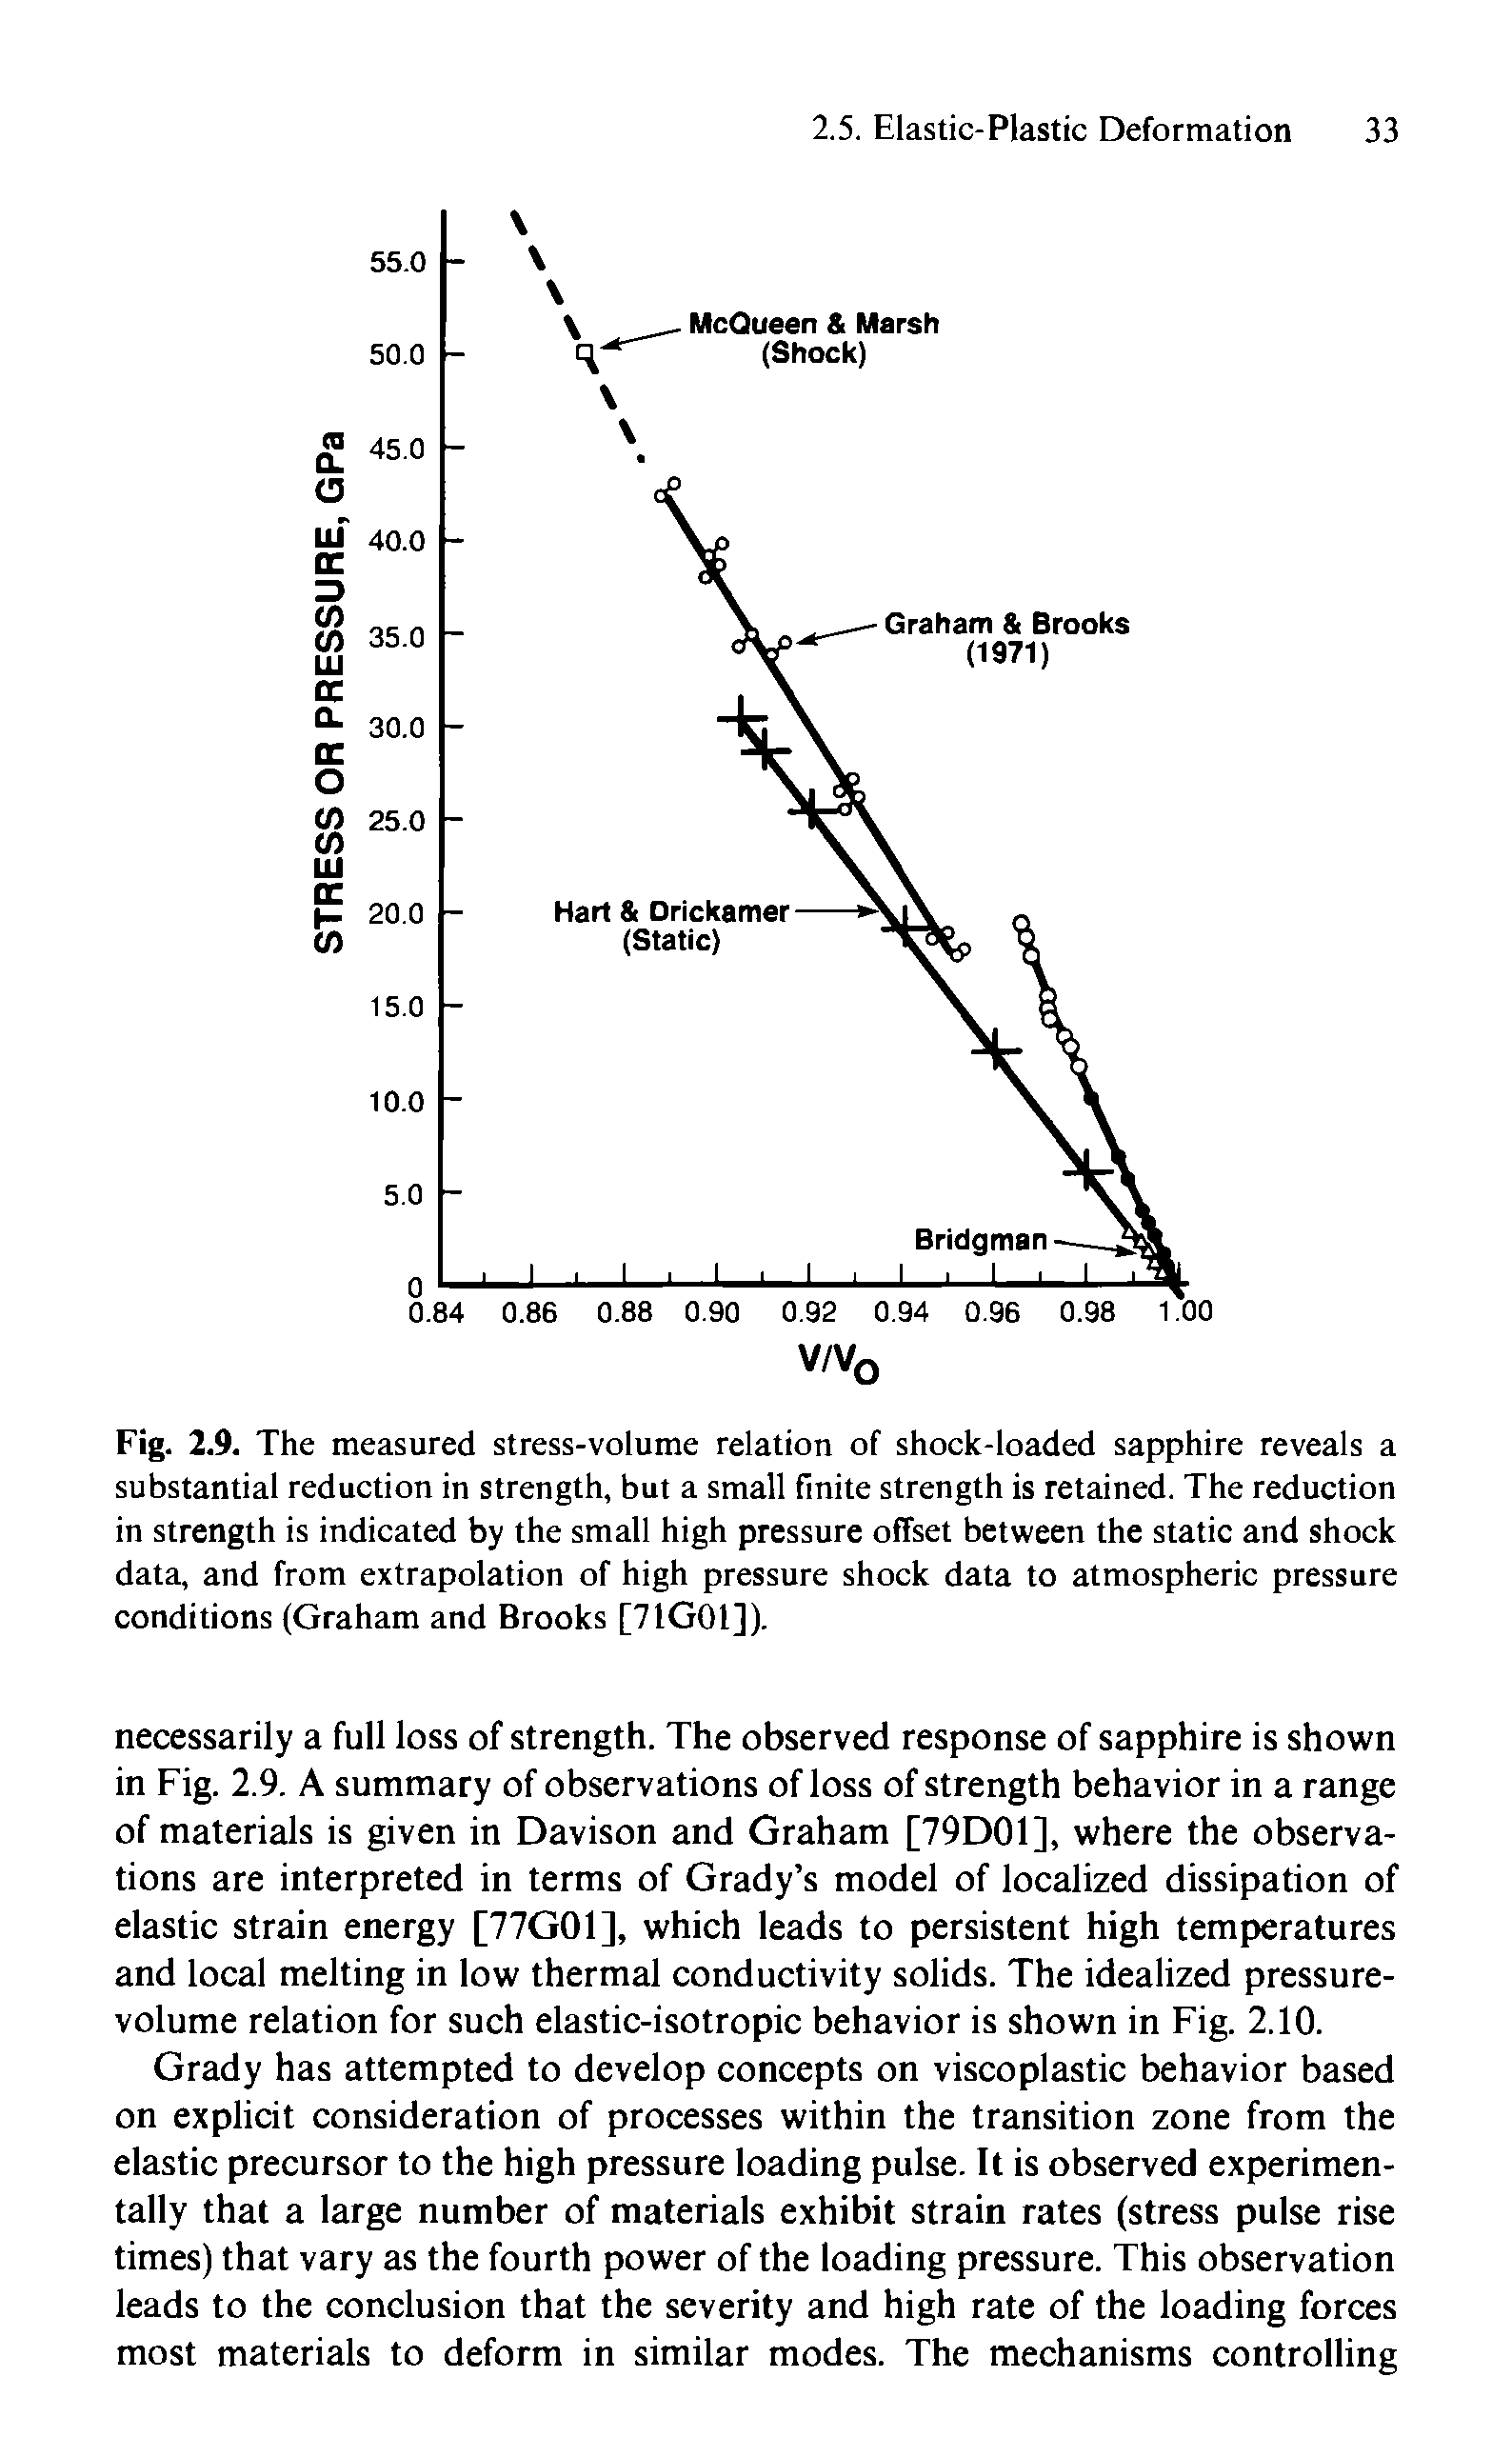 Fig. 2.9. The measured stress-volume relation of shock-loaded sapphire reveals a substantial reduction in strength, but a small finite strength is retained. The reduction in strength is indicated by the small high pressure offset between the static and shock data, and from extrapolation of high pressure shock data to atmospheric pressure conditions (Graham and Brooks [71G01]).